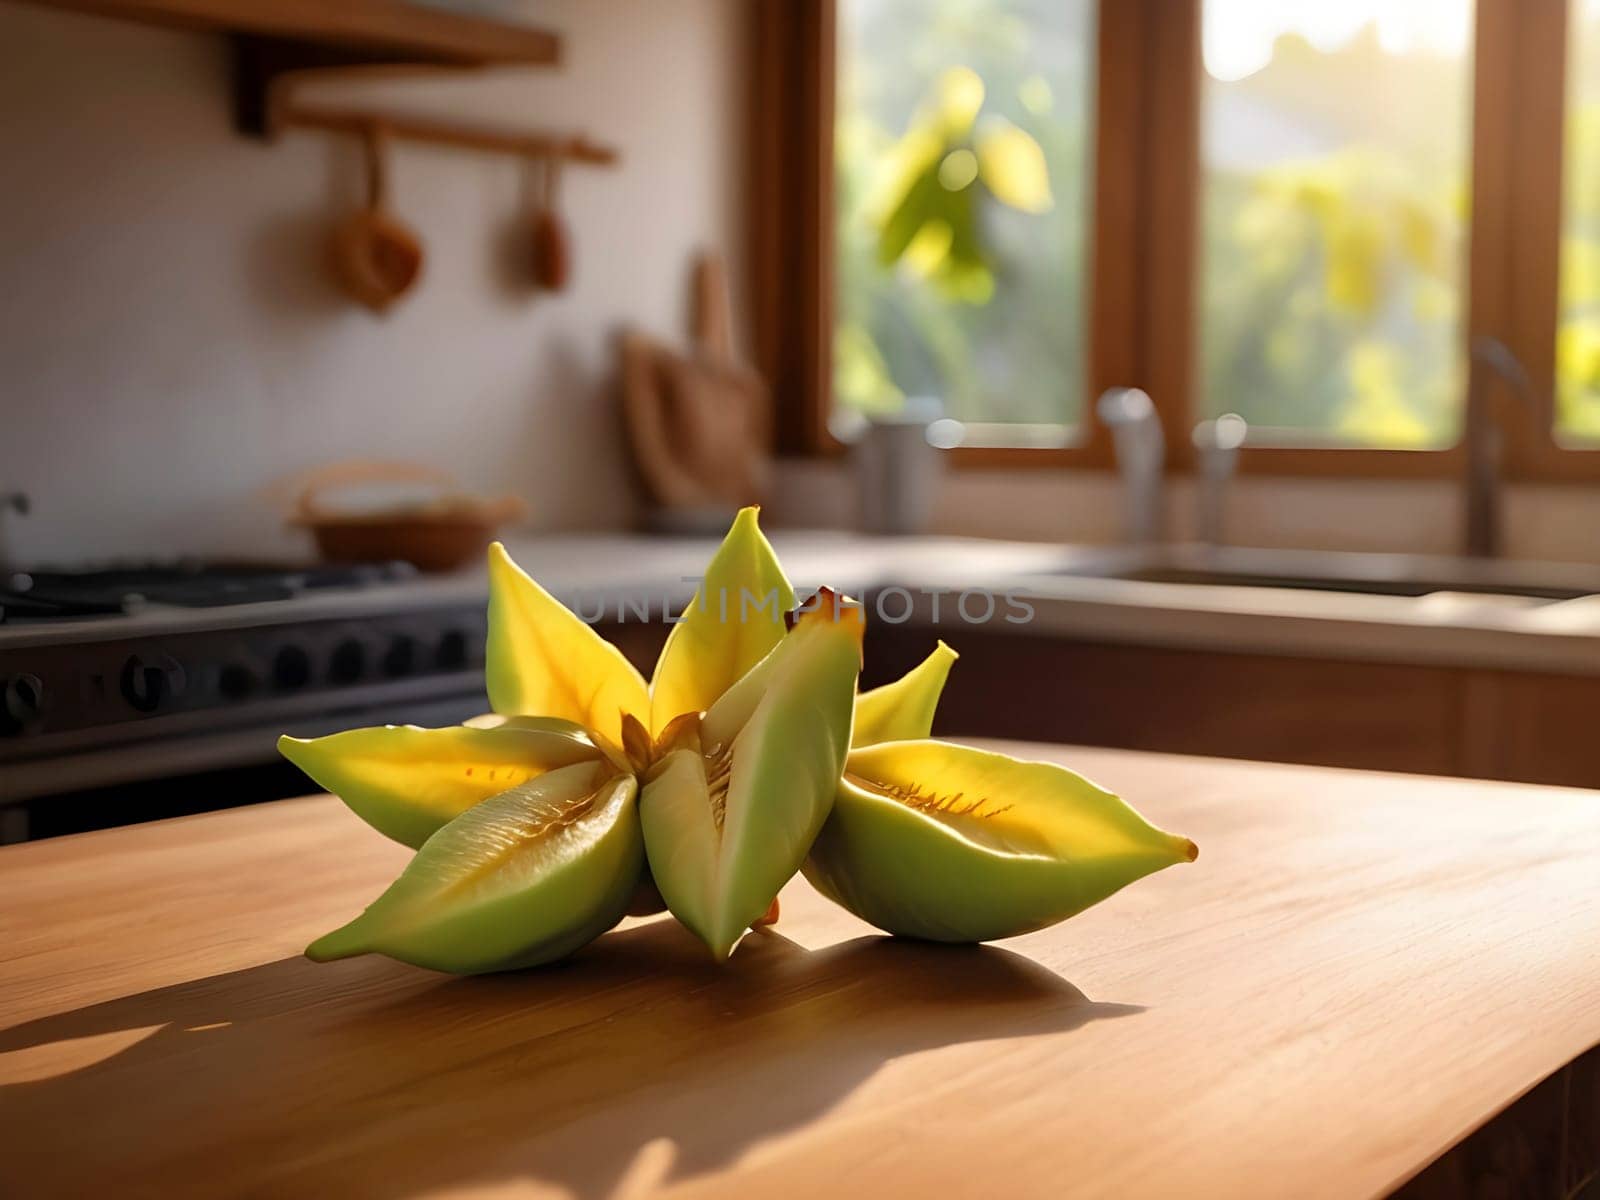 Kitchen Harmony: Afternoon Glow Illuminating Star Fruit on a Rustic Cutting Board by mailos